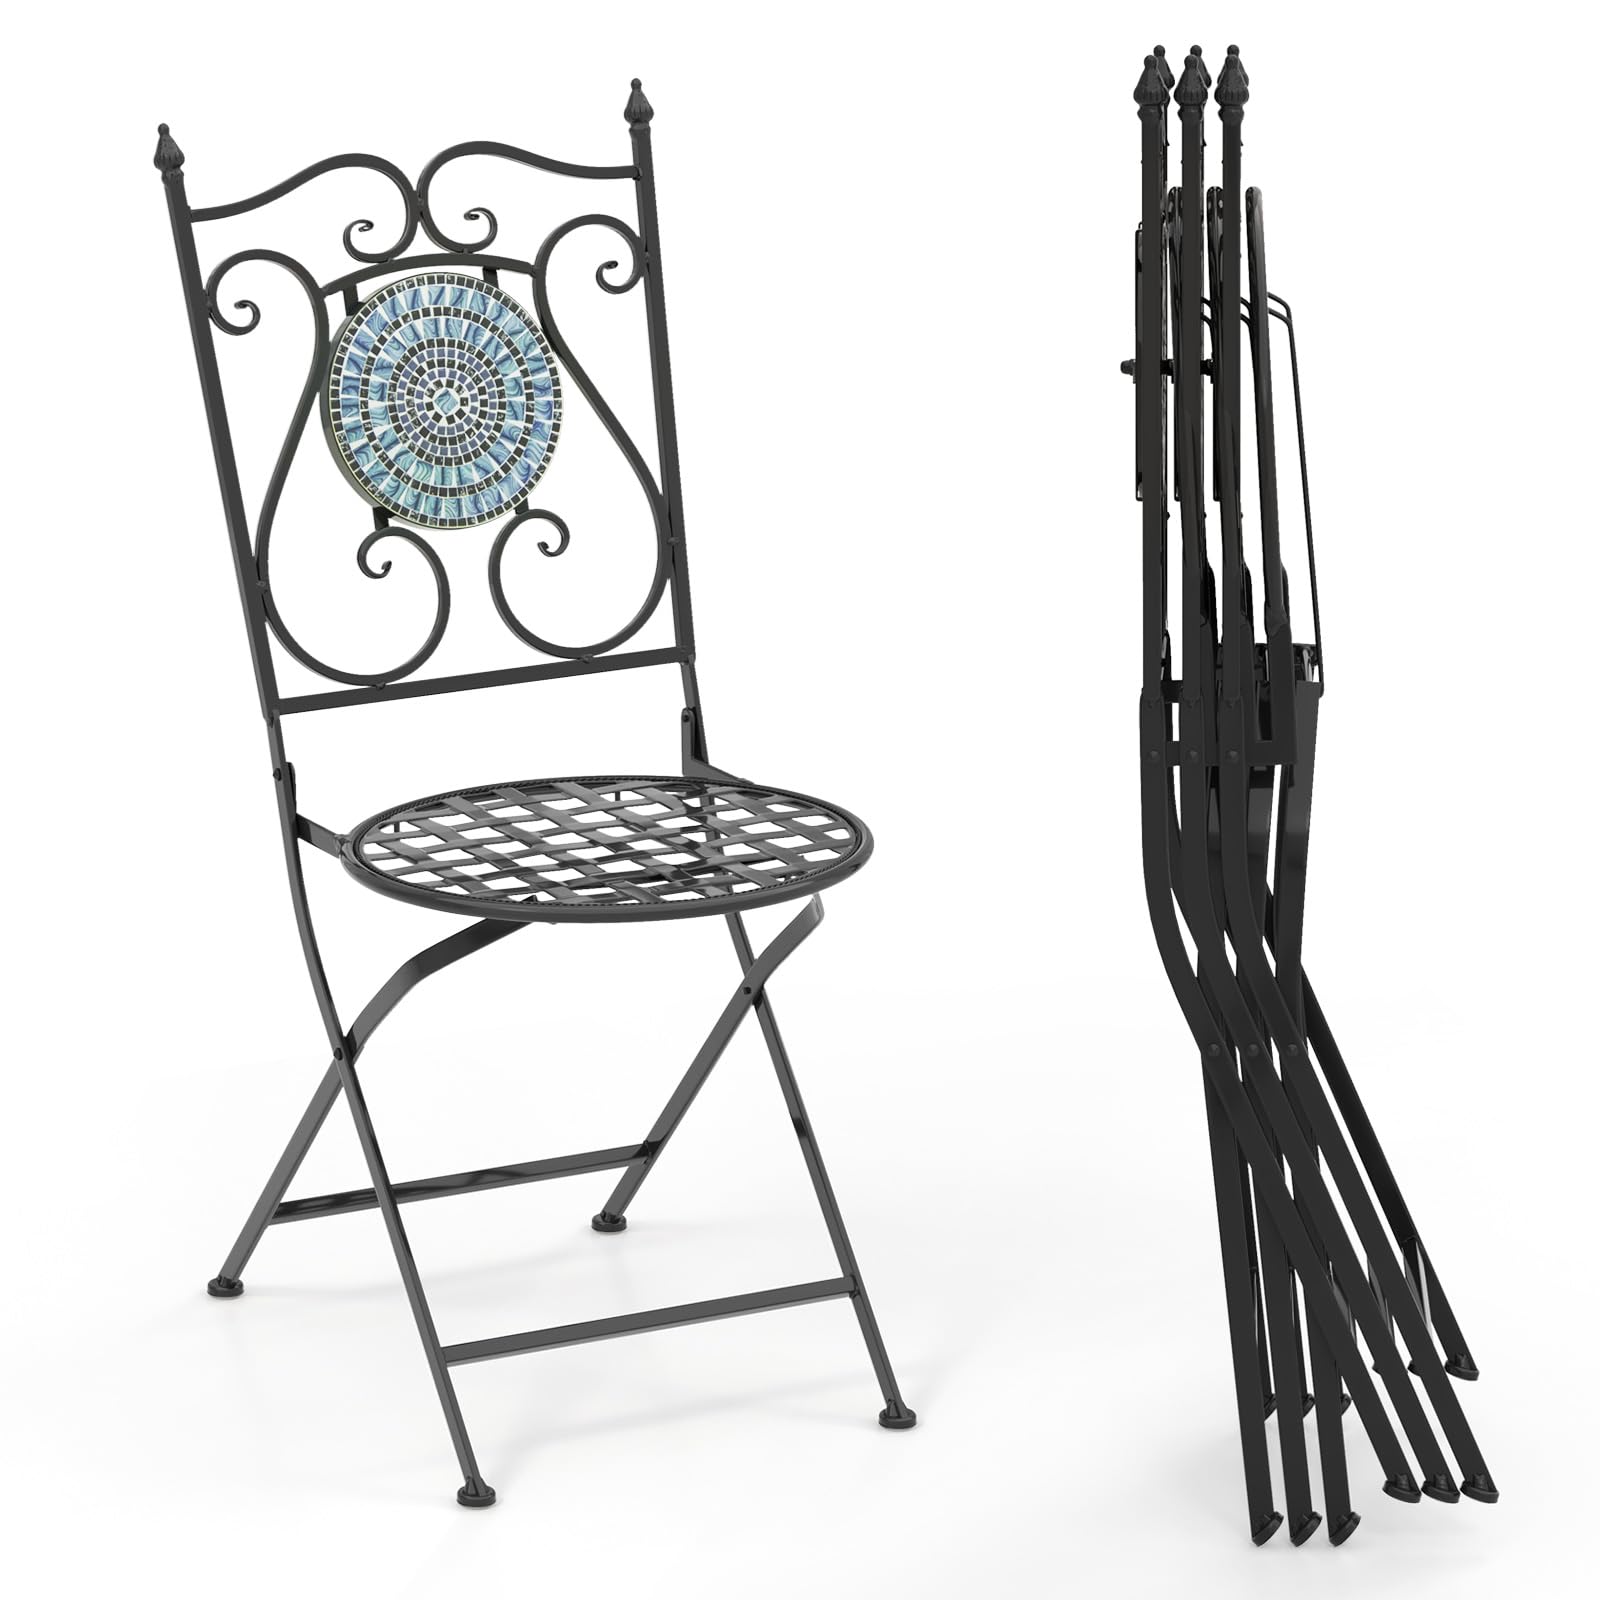 Giantex Patio Folding Chairs, Mosaic Bistro Chairs w/Backrest & Round Seat for Porch Balcony Lawn